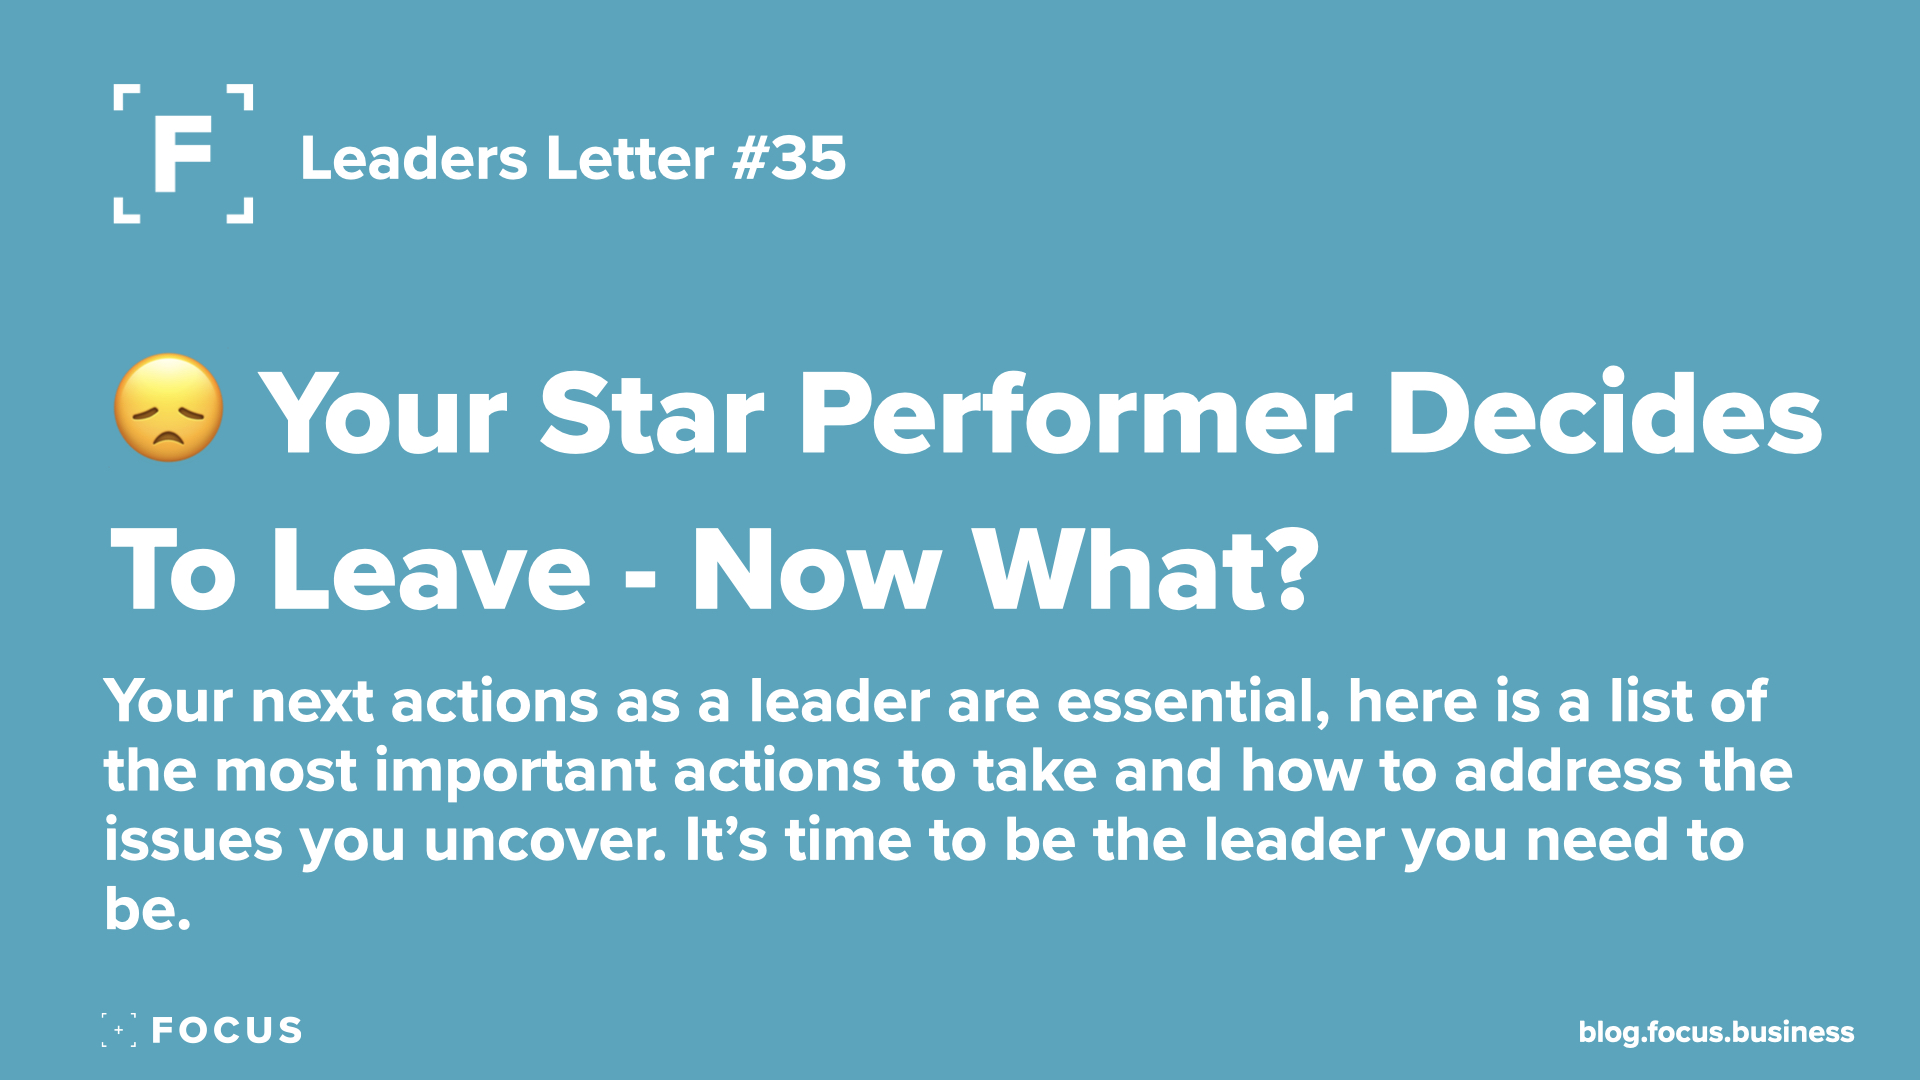 Leaders Letter 35 - your star performer decides to leave now what